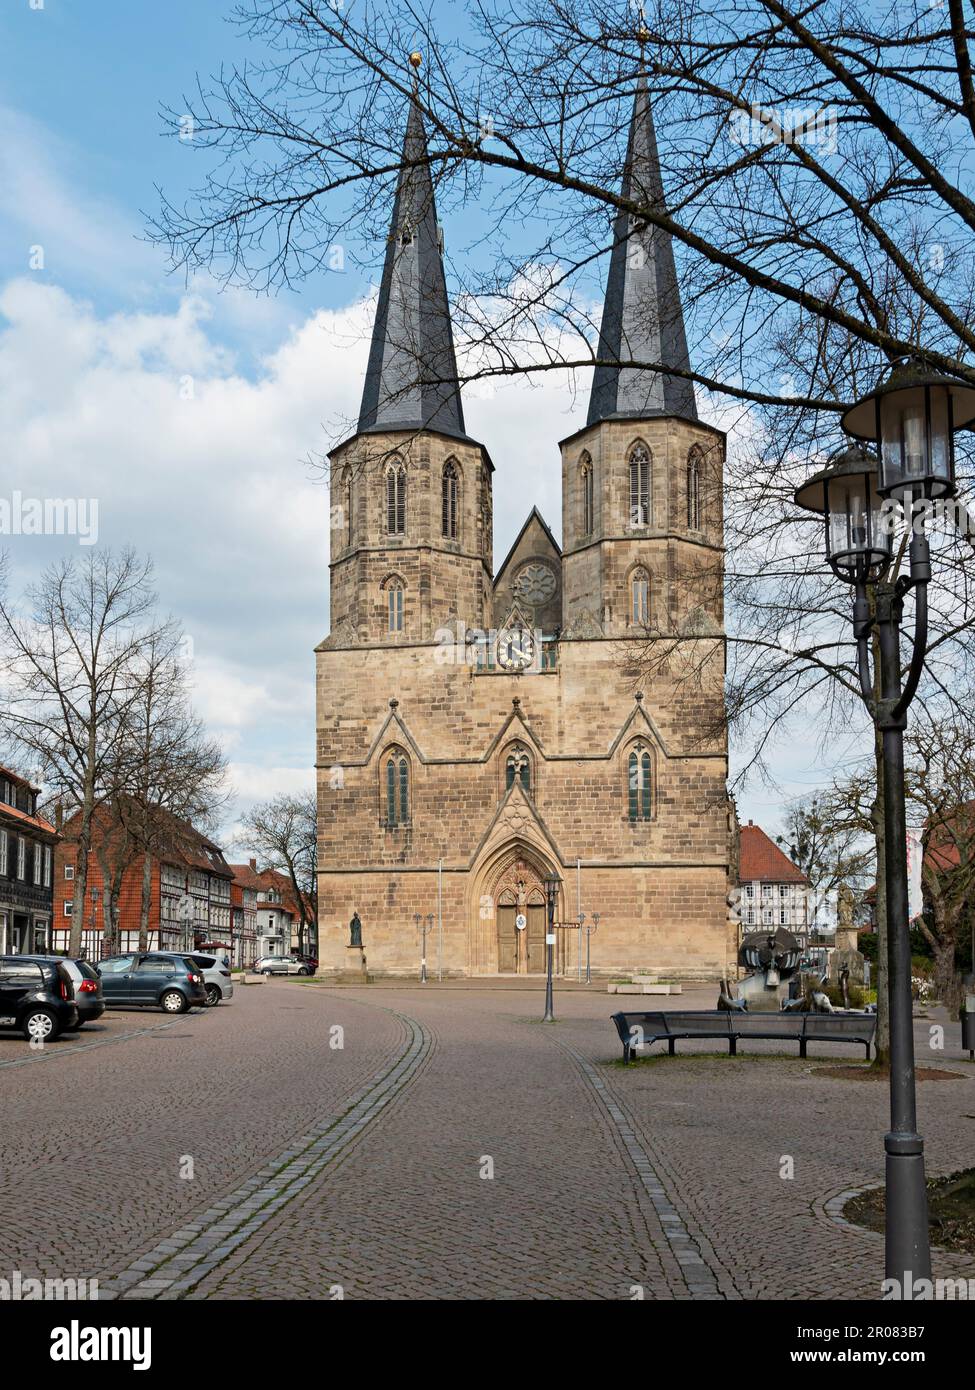 Marketplace with Basilica St. Cyriakus in Duderstadt, Germany Stock Photo